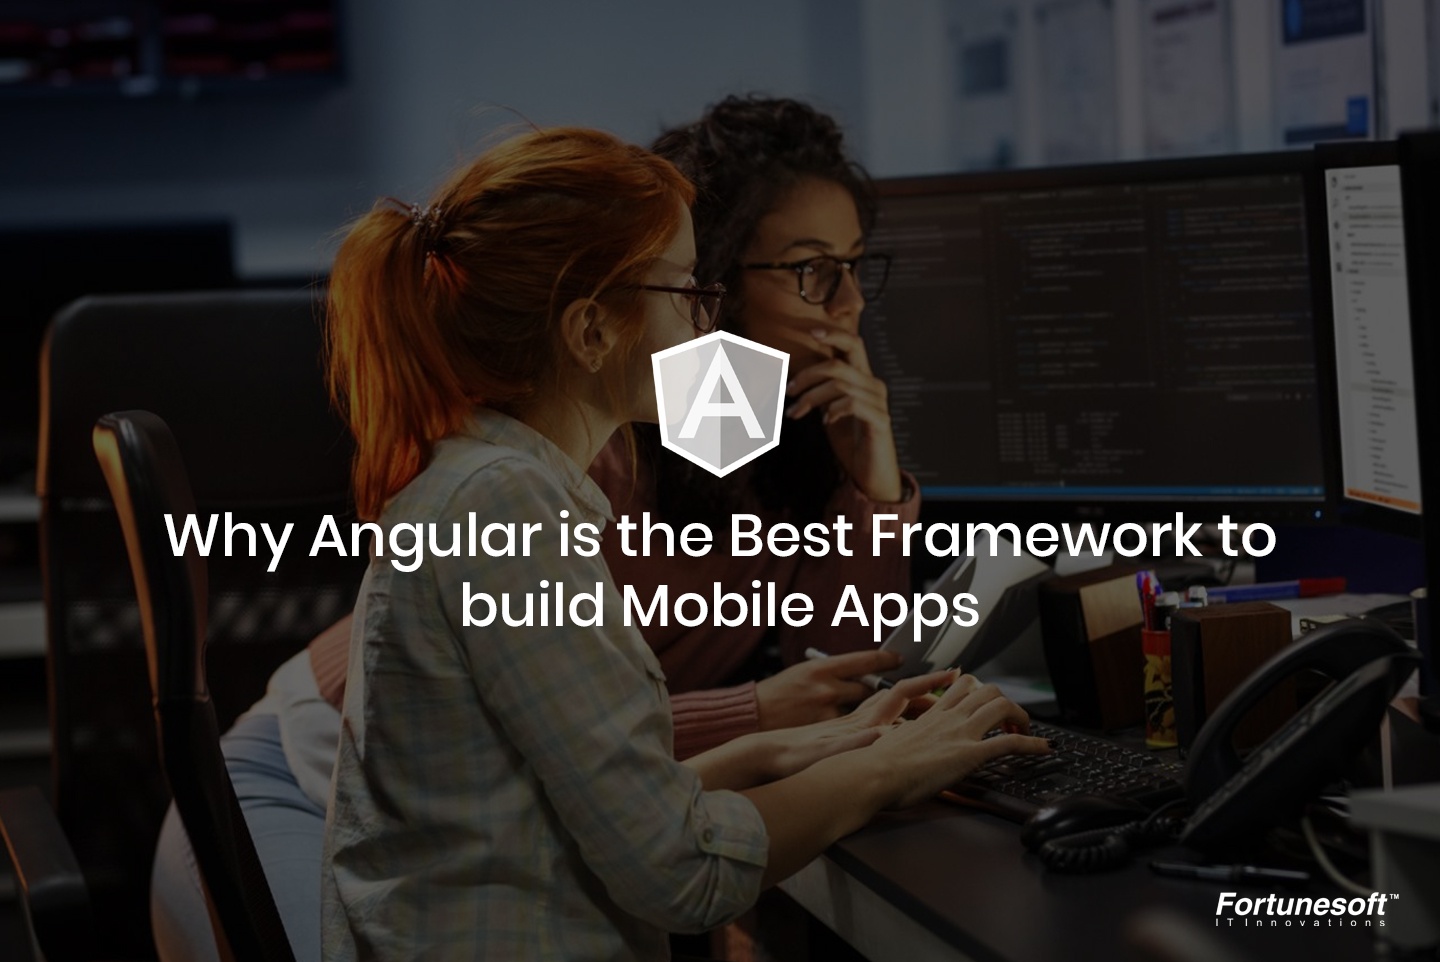 Fortunesoft IT Innovations, Inc. Opencart News: Why build mobile apps with Angular